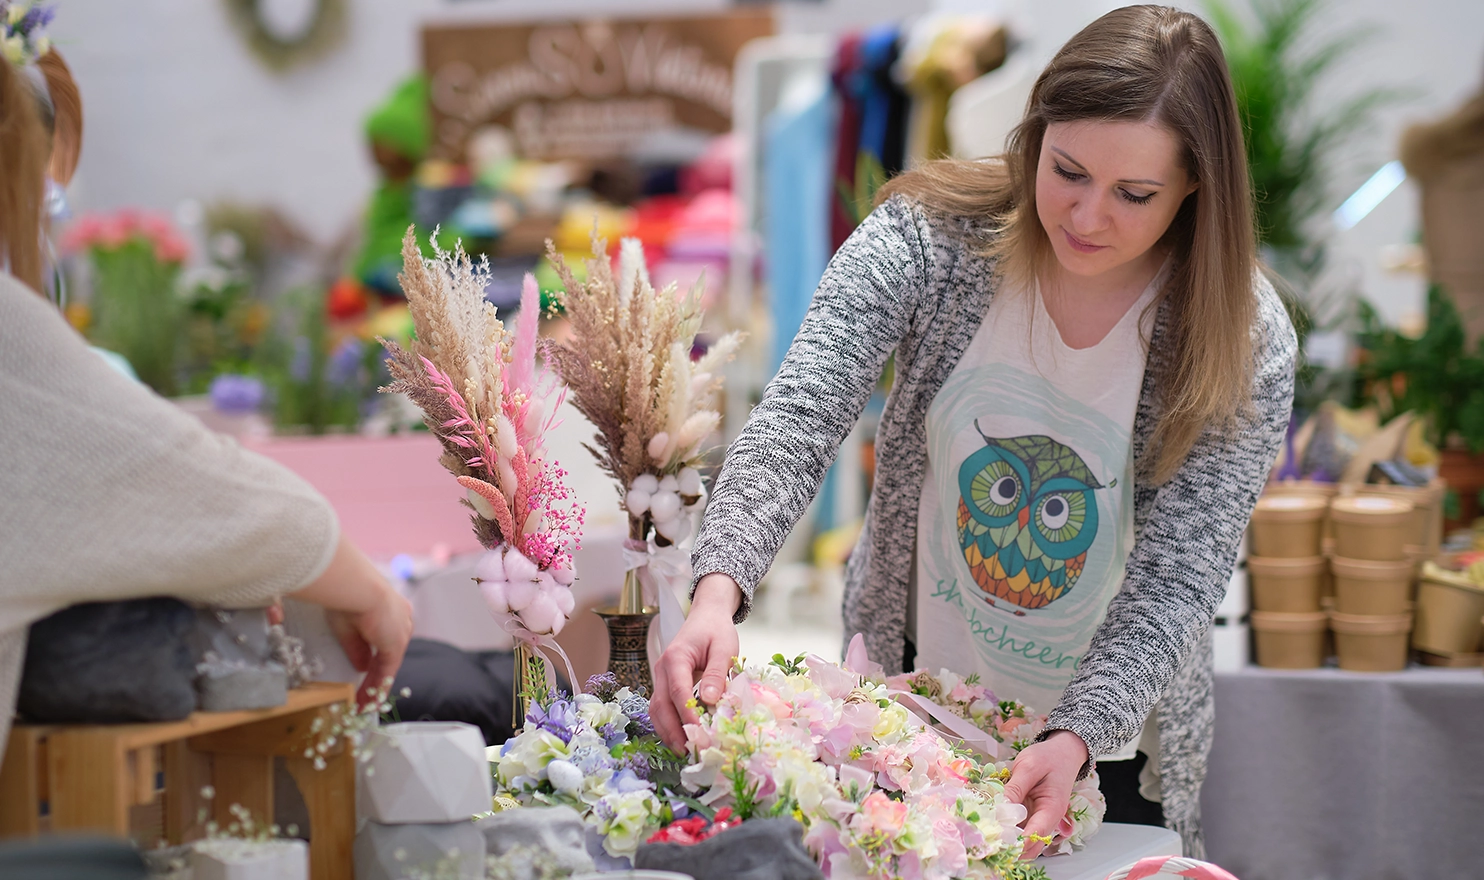 A crafter sets up her handmade floral wreaths in her booth at an indoor craft fair.